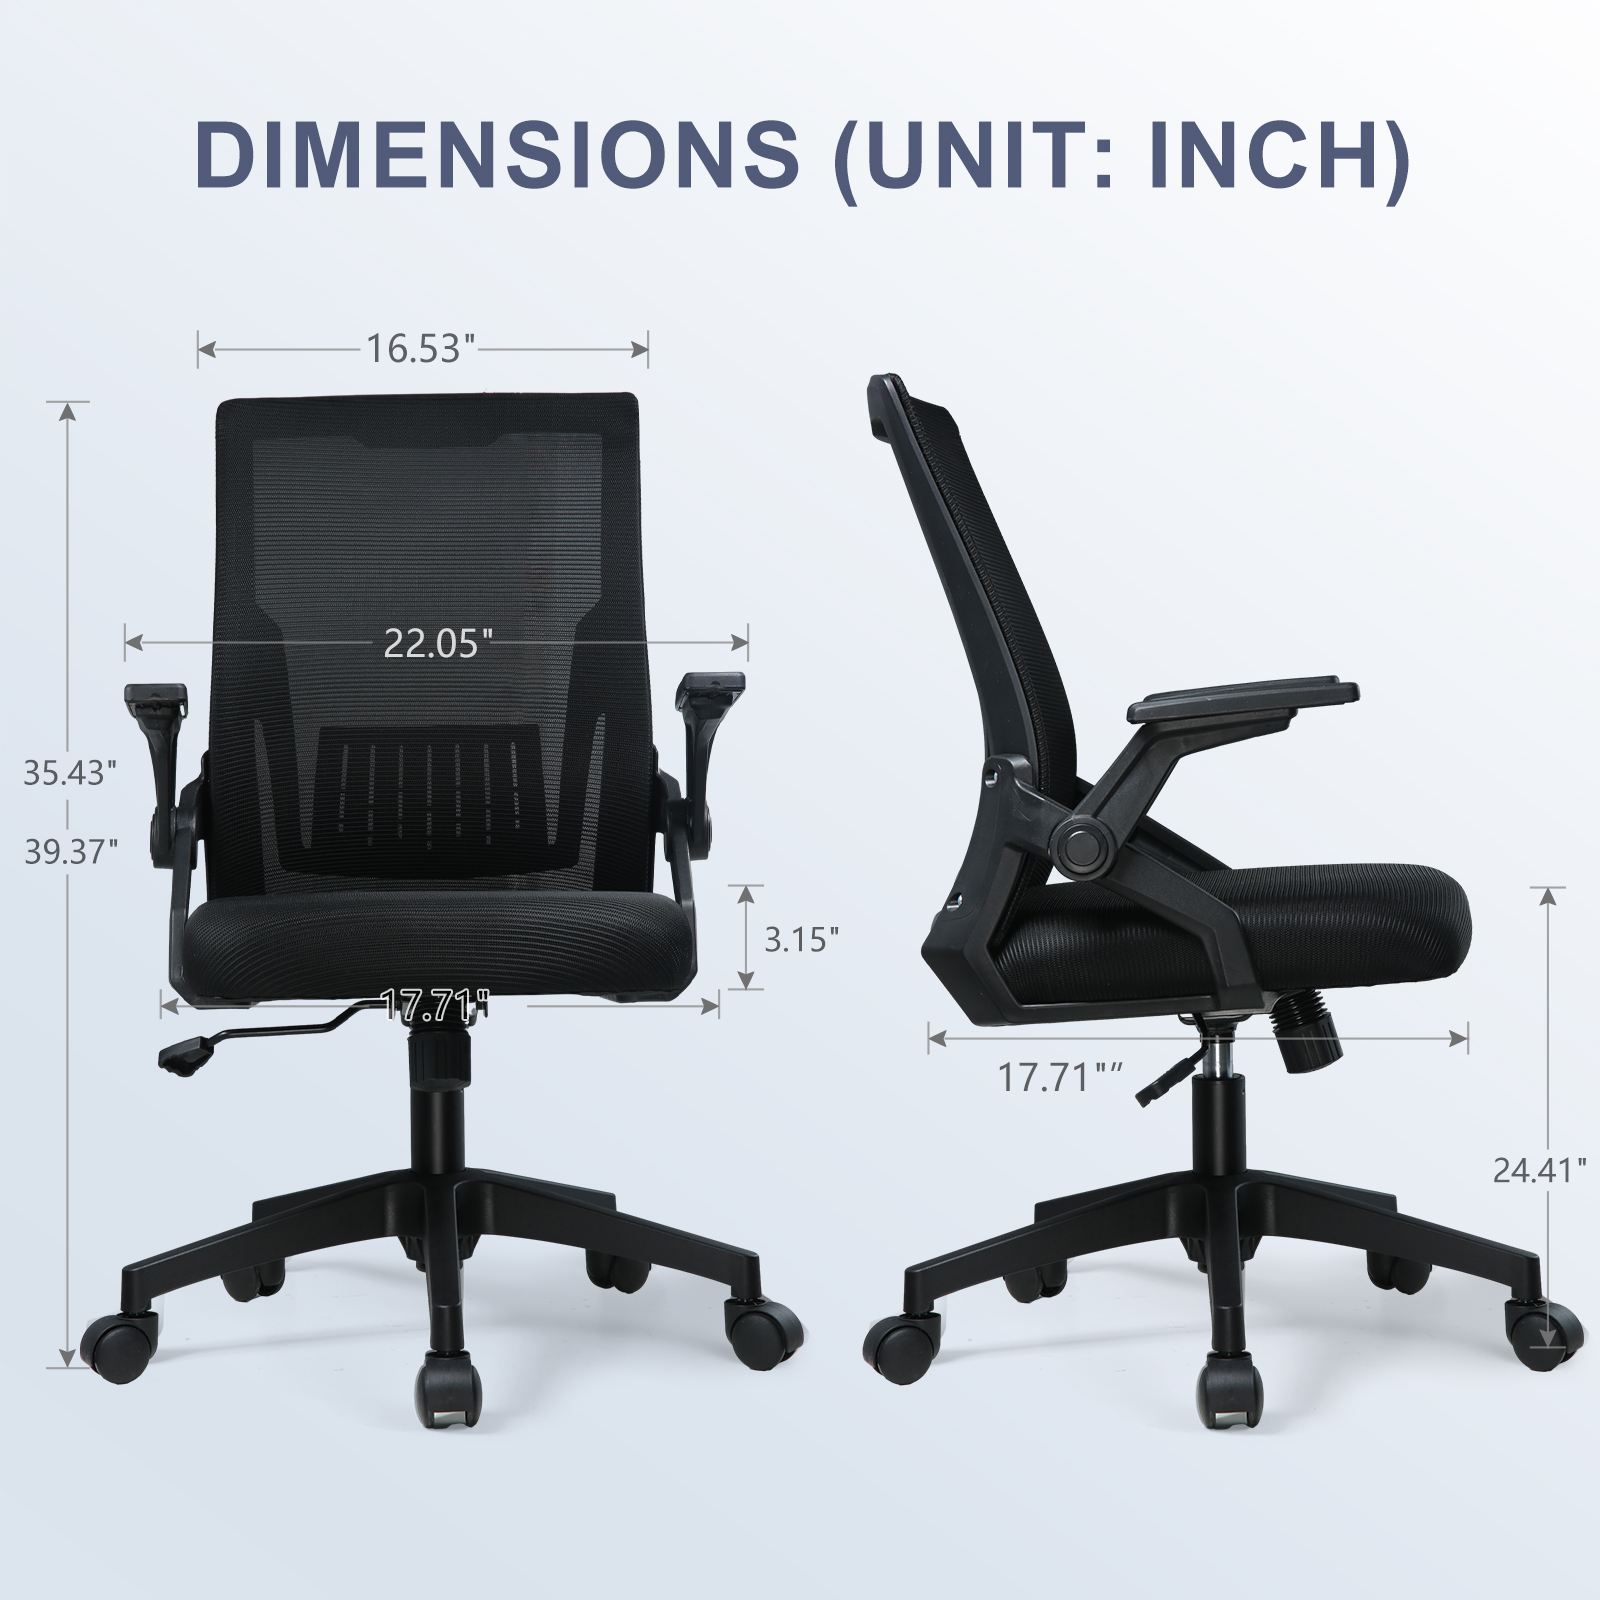 COMHOMA Mesh Office Chair with Flip-Up Armrests Mid Back Computer Chair, Black - image 4 of 8